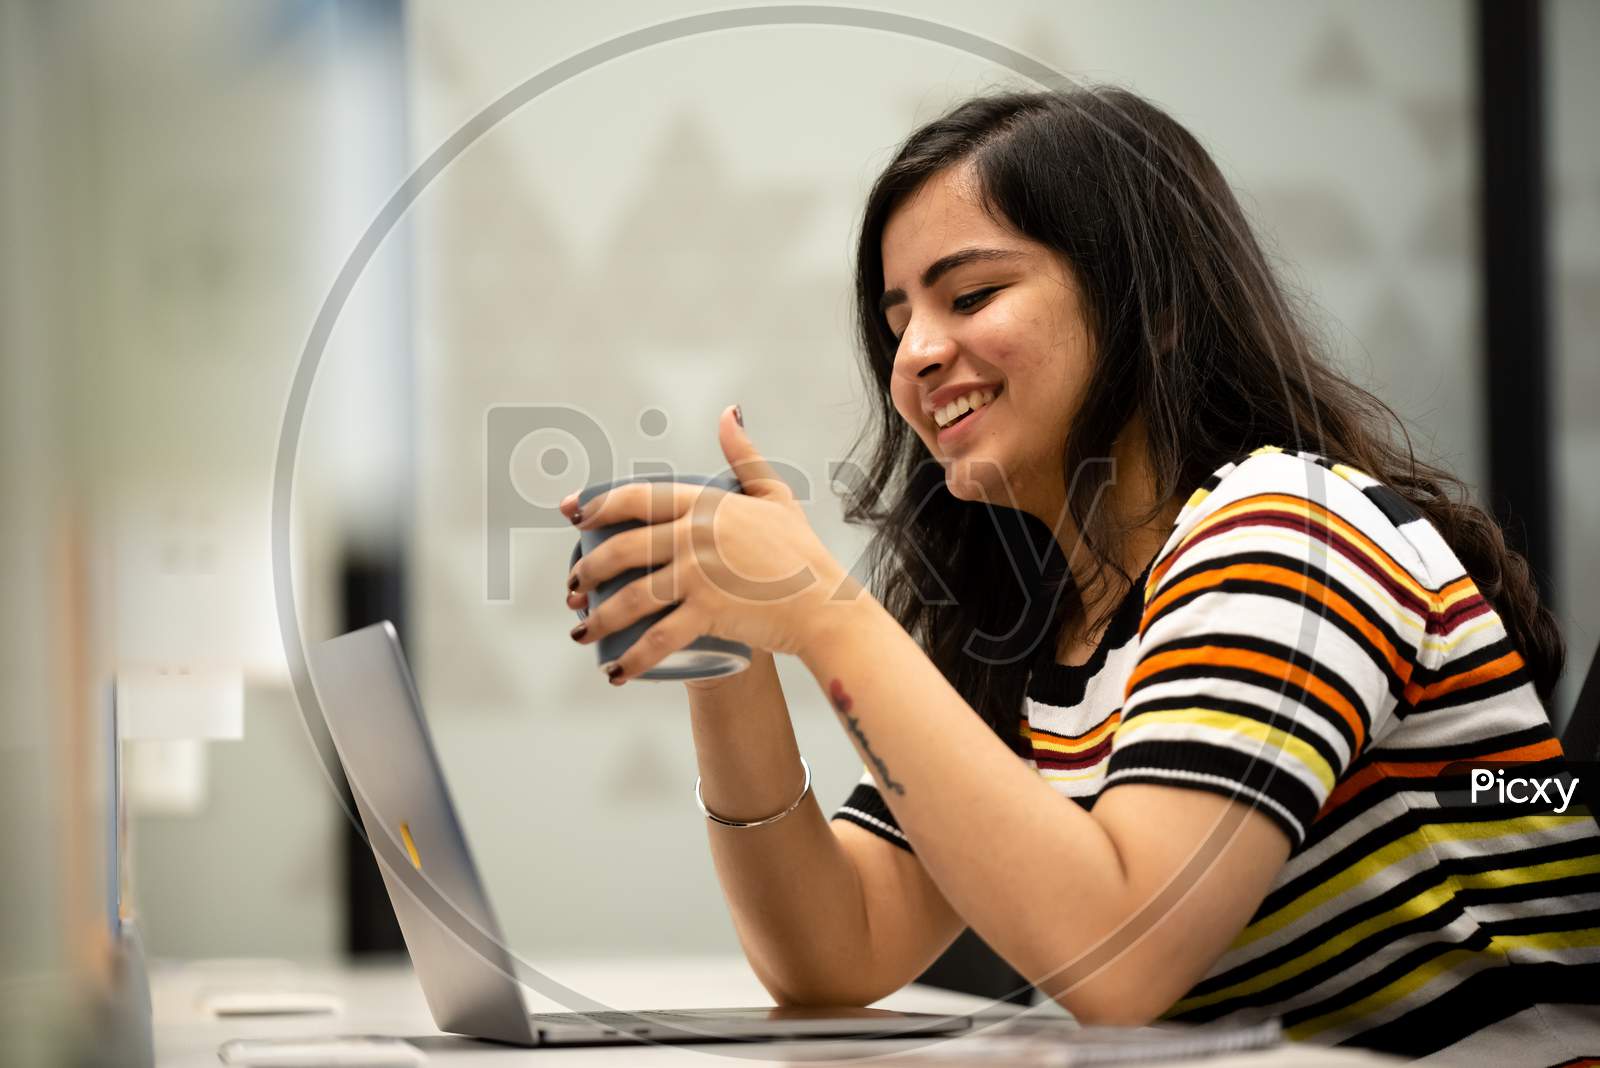 smiling young woman drinks coffee at work